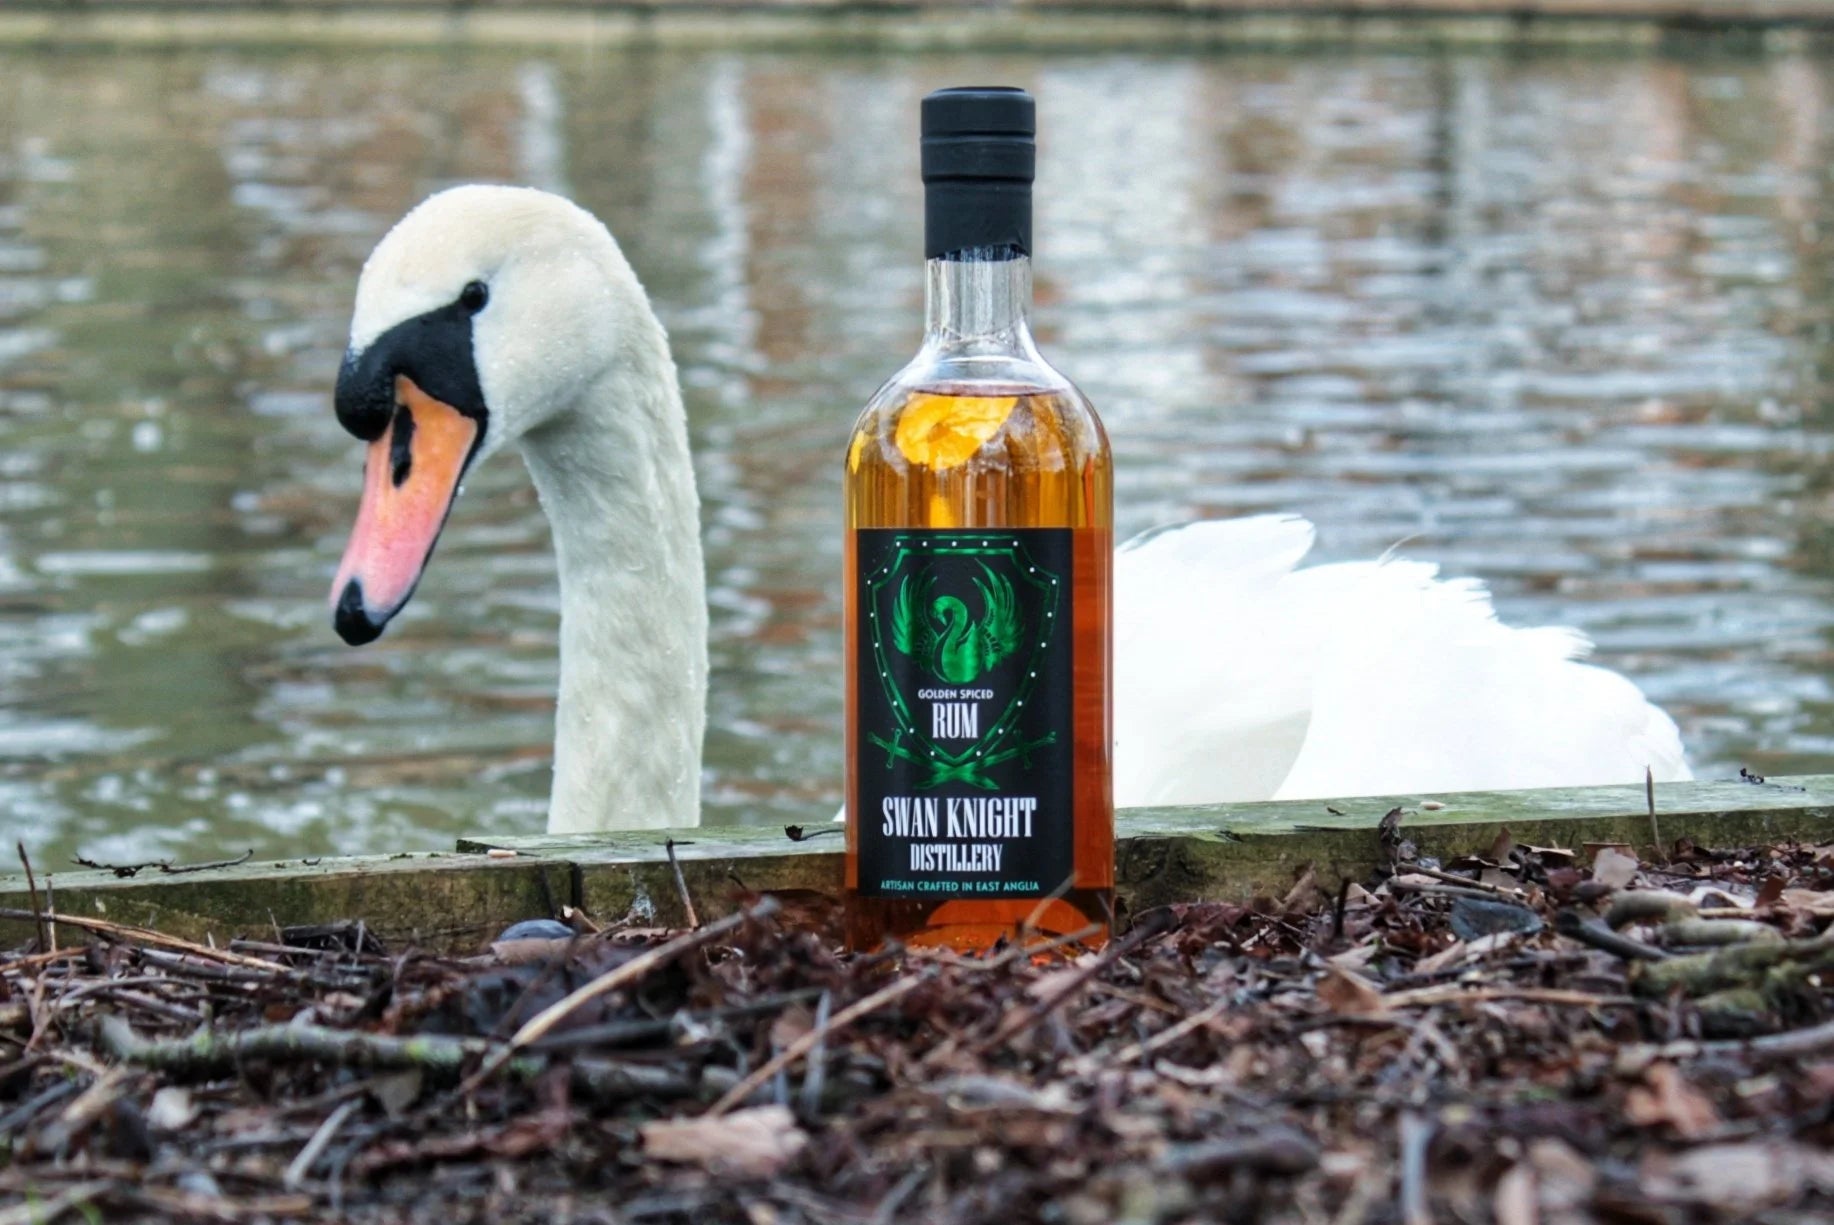 Swan investigating a bottle of Swan Knight Distillery golden spiced rum on Bedford river bank